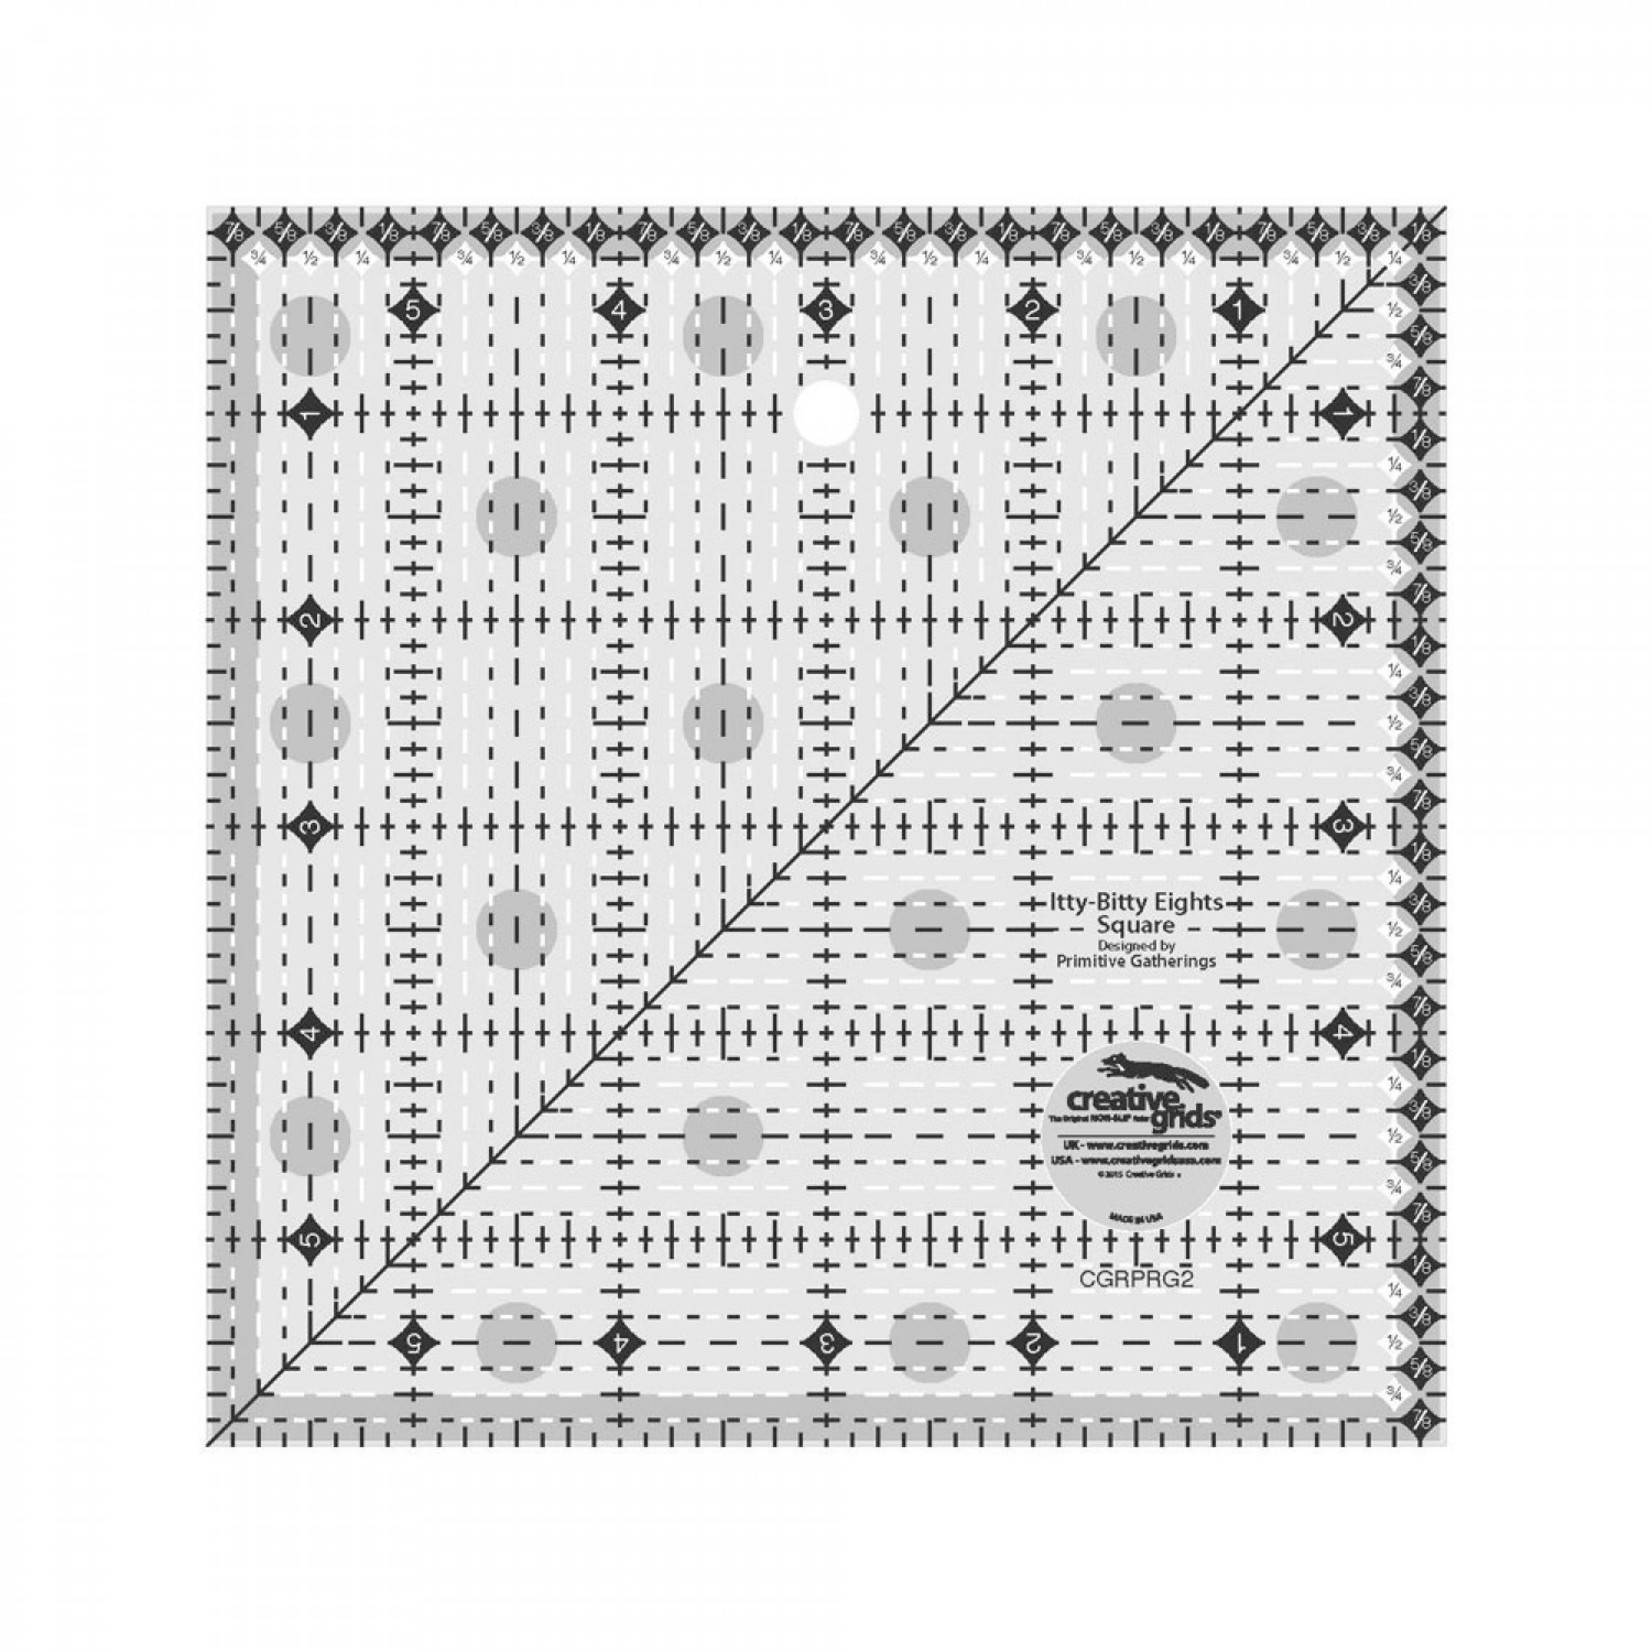 Creative Grids Creative Grids Charming Itty Bitty Eights Square XL CGRPRG4